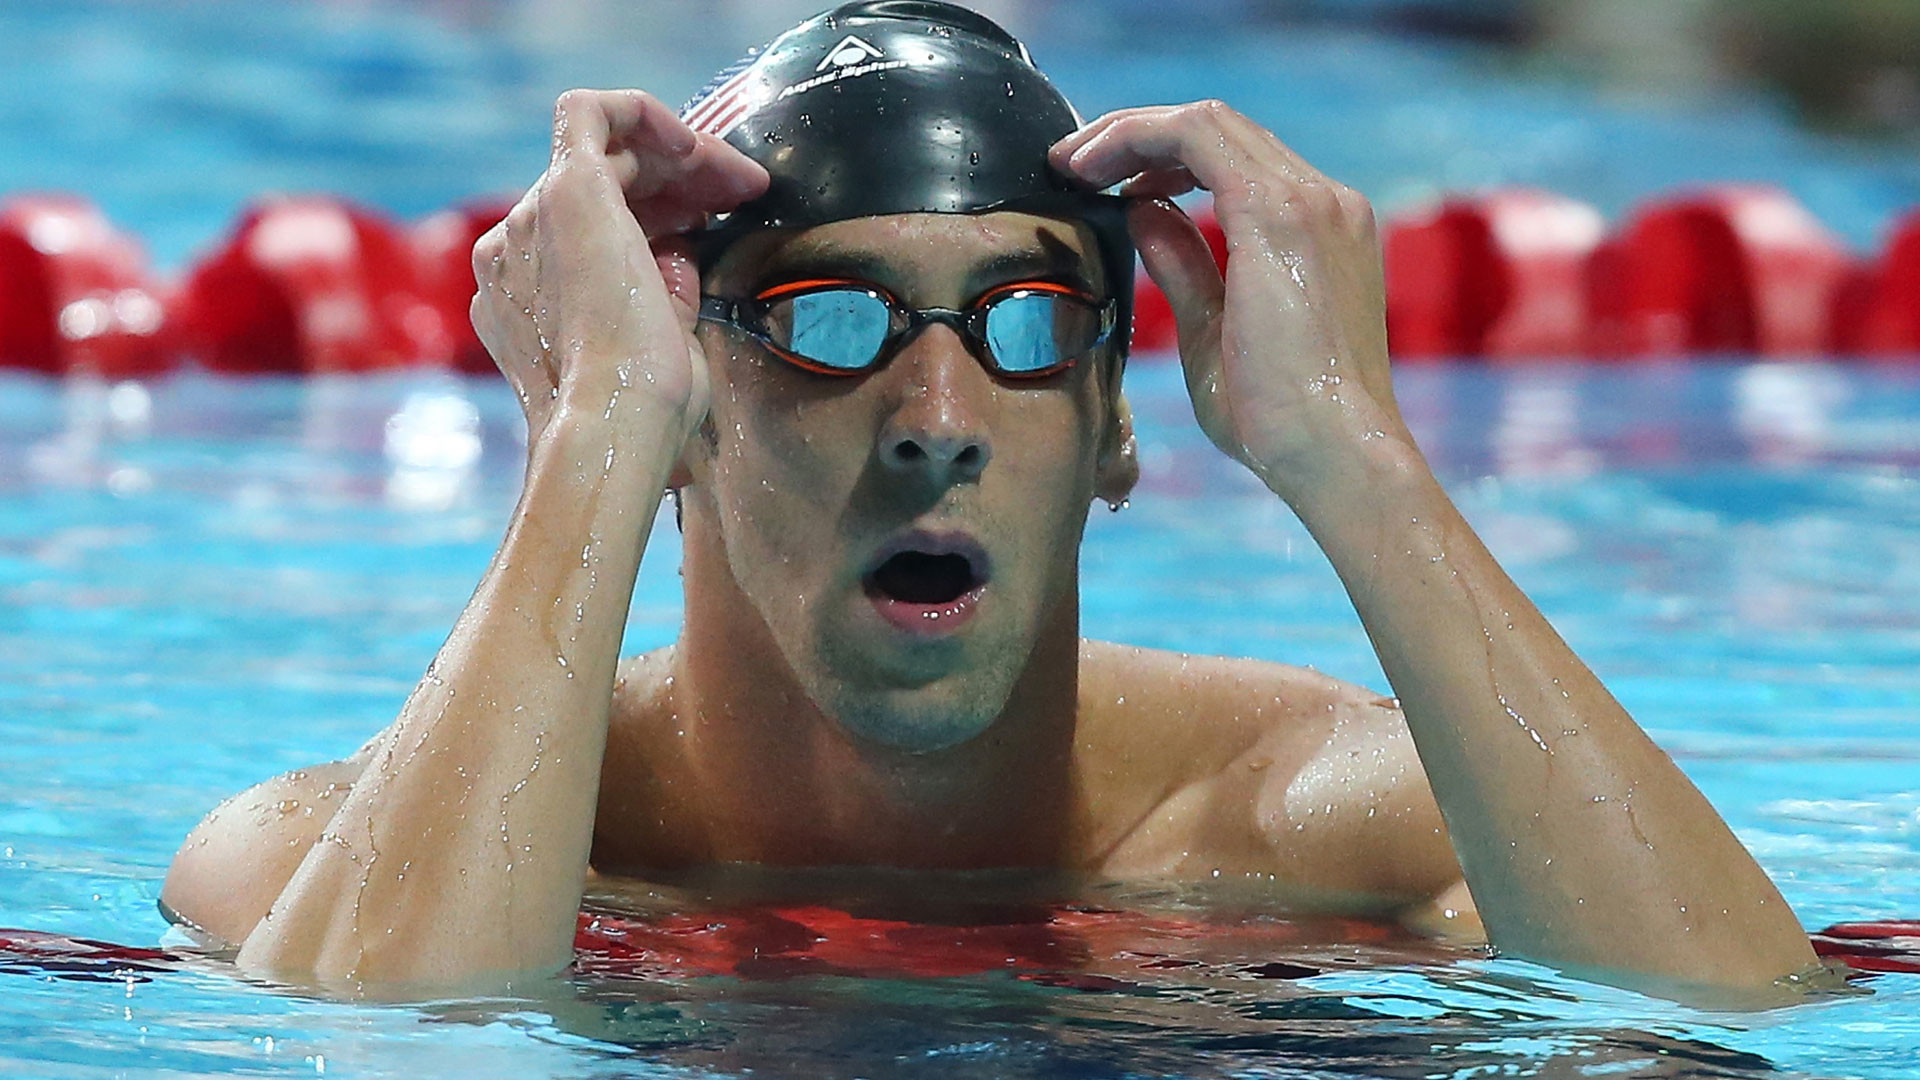 Michael Phelps, Wallpaper gallery, Extensive collection, Wide variety, 1920x1080 Full HD Desktop